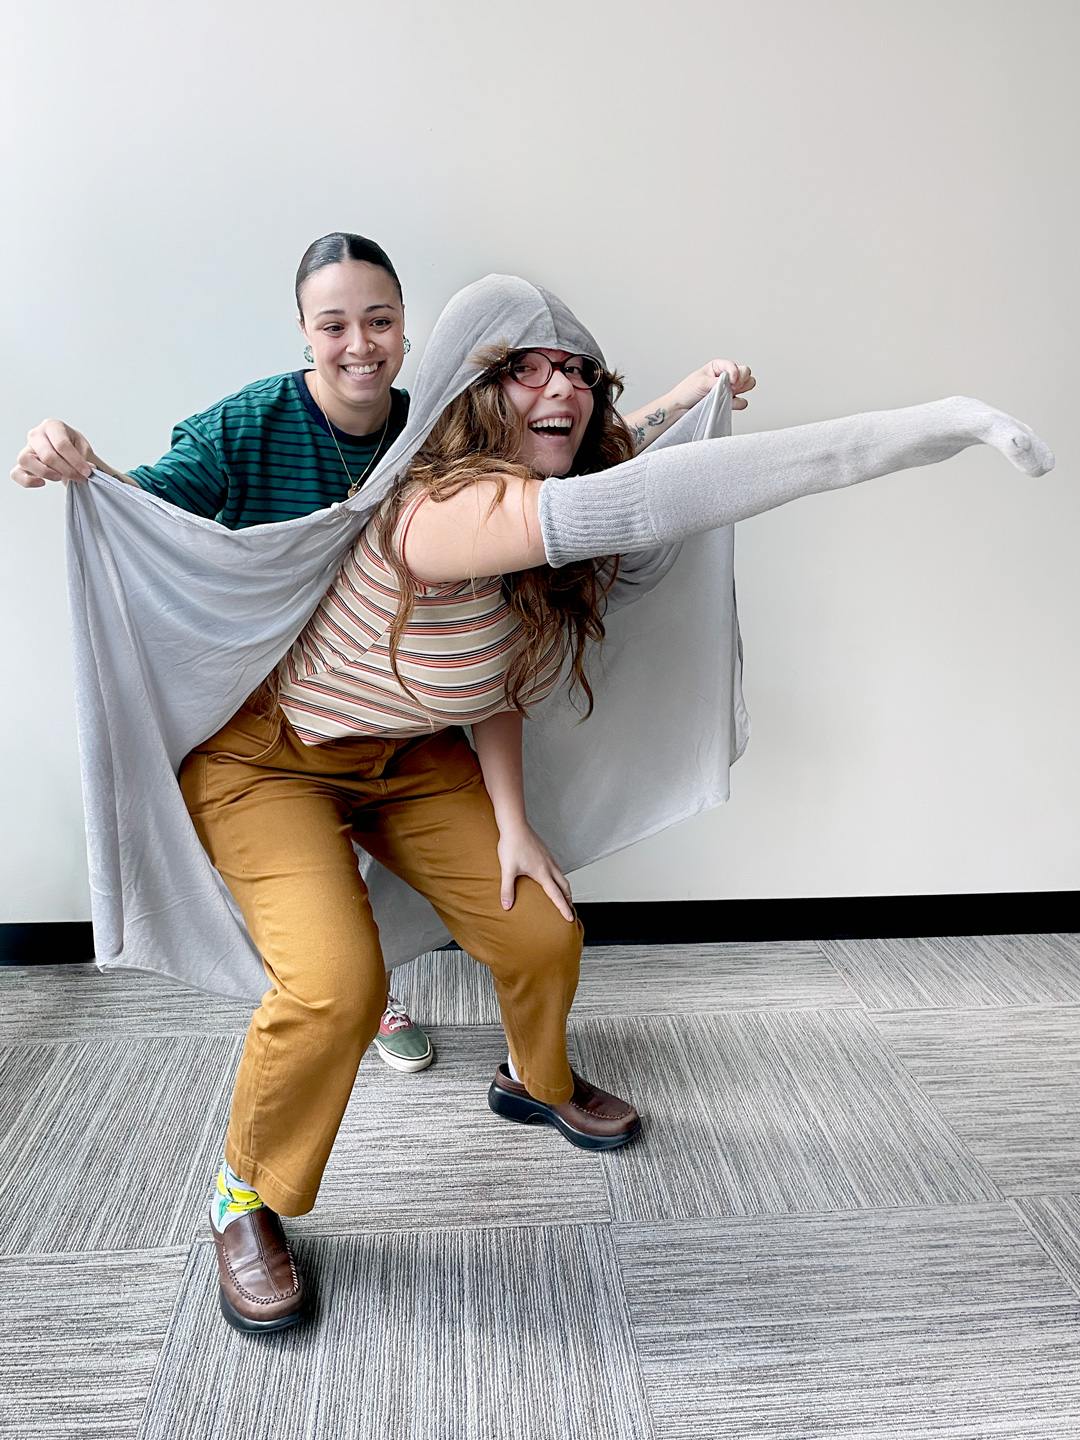 Siobhan pinches the corners of a grey cape that's draped over Kyla's head and shoulders, while Kyla stretches out her sock-wrapped arm like an elephant's trunk